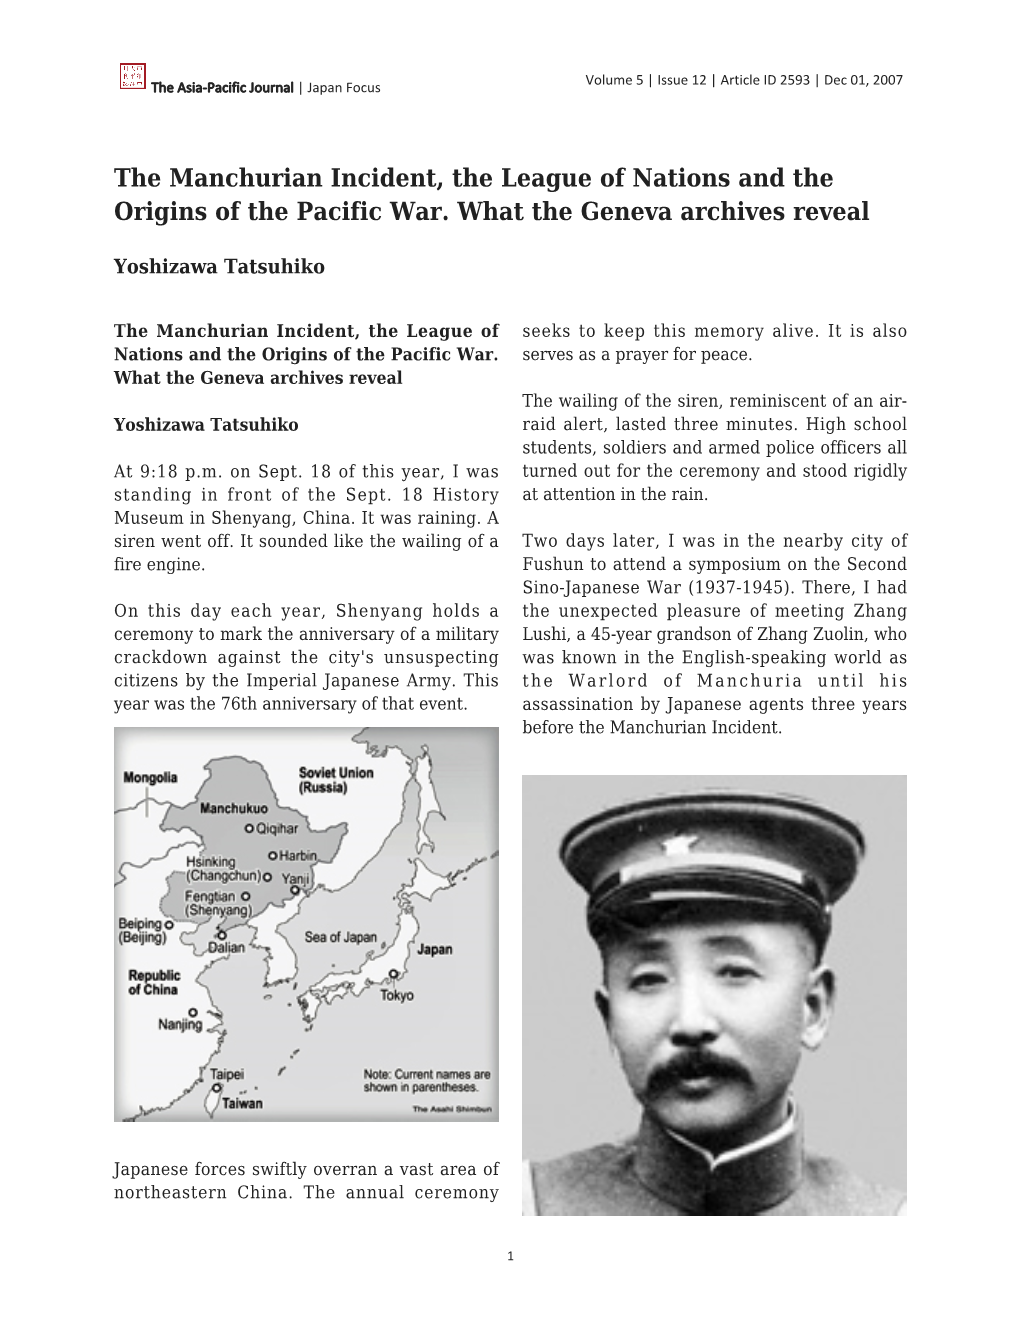 The Manchurian Incident, the League of Nations and the Origins of the Pacific War. What the Geneva Archives Reveal